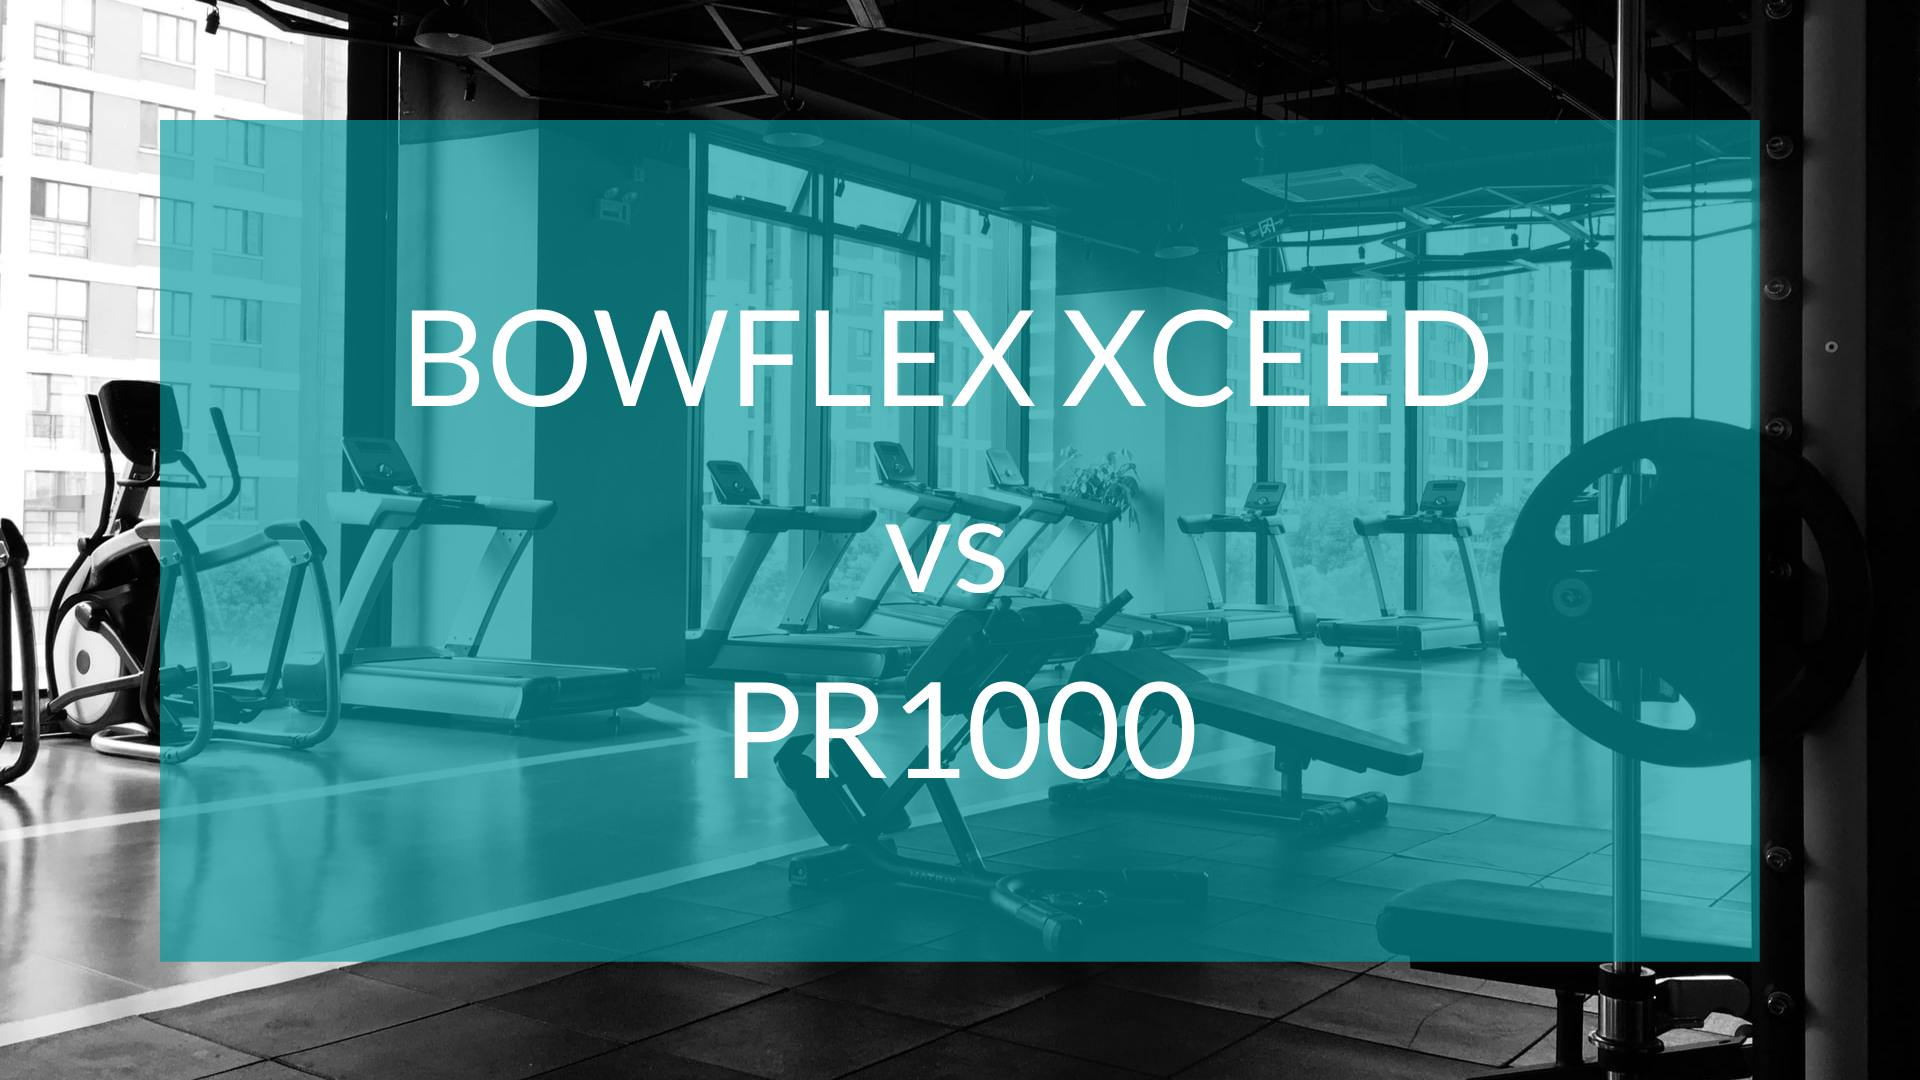 Bowflex Xceed vs PR1000 text in front of gym background